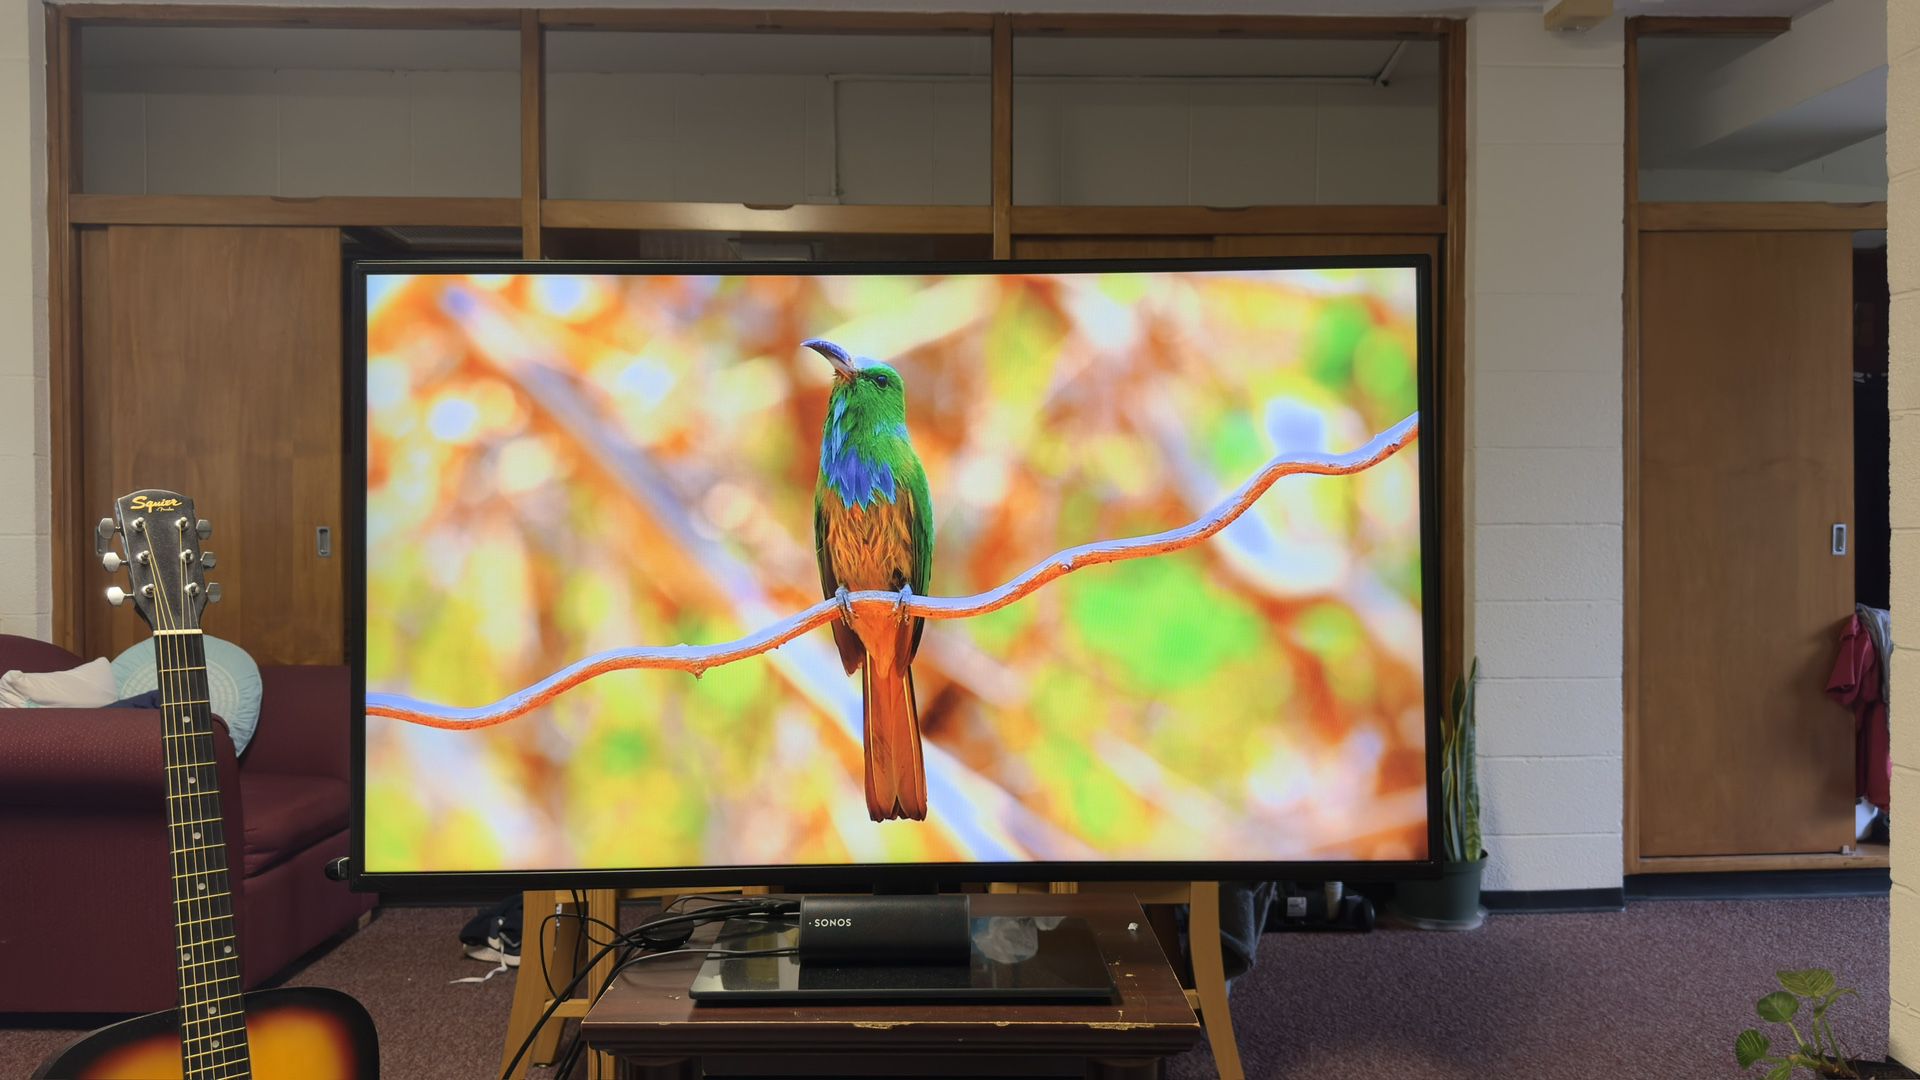 LG 49 inch TV Display for Sale